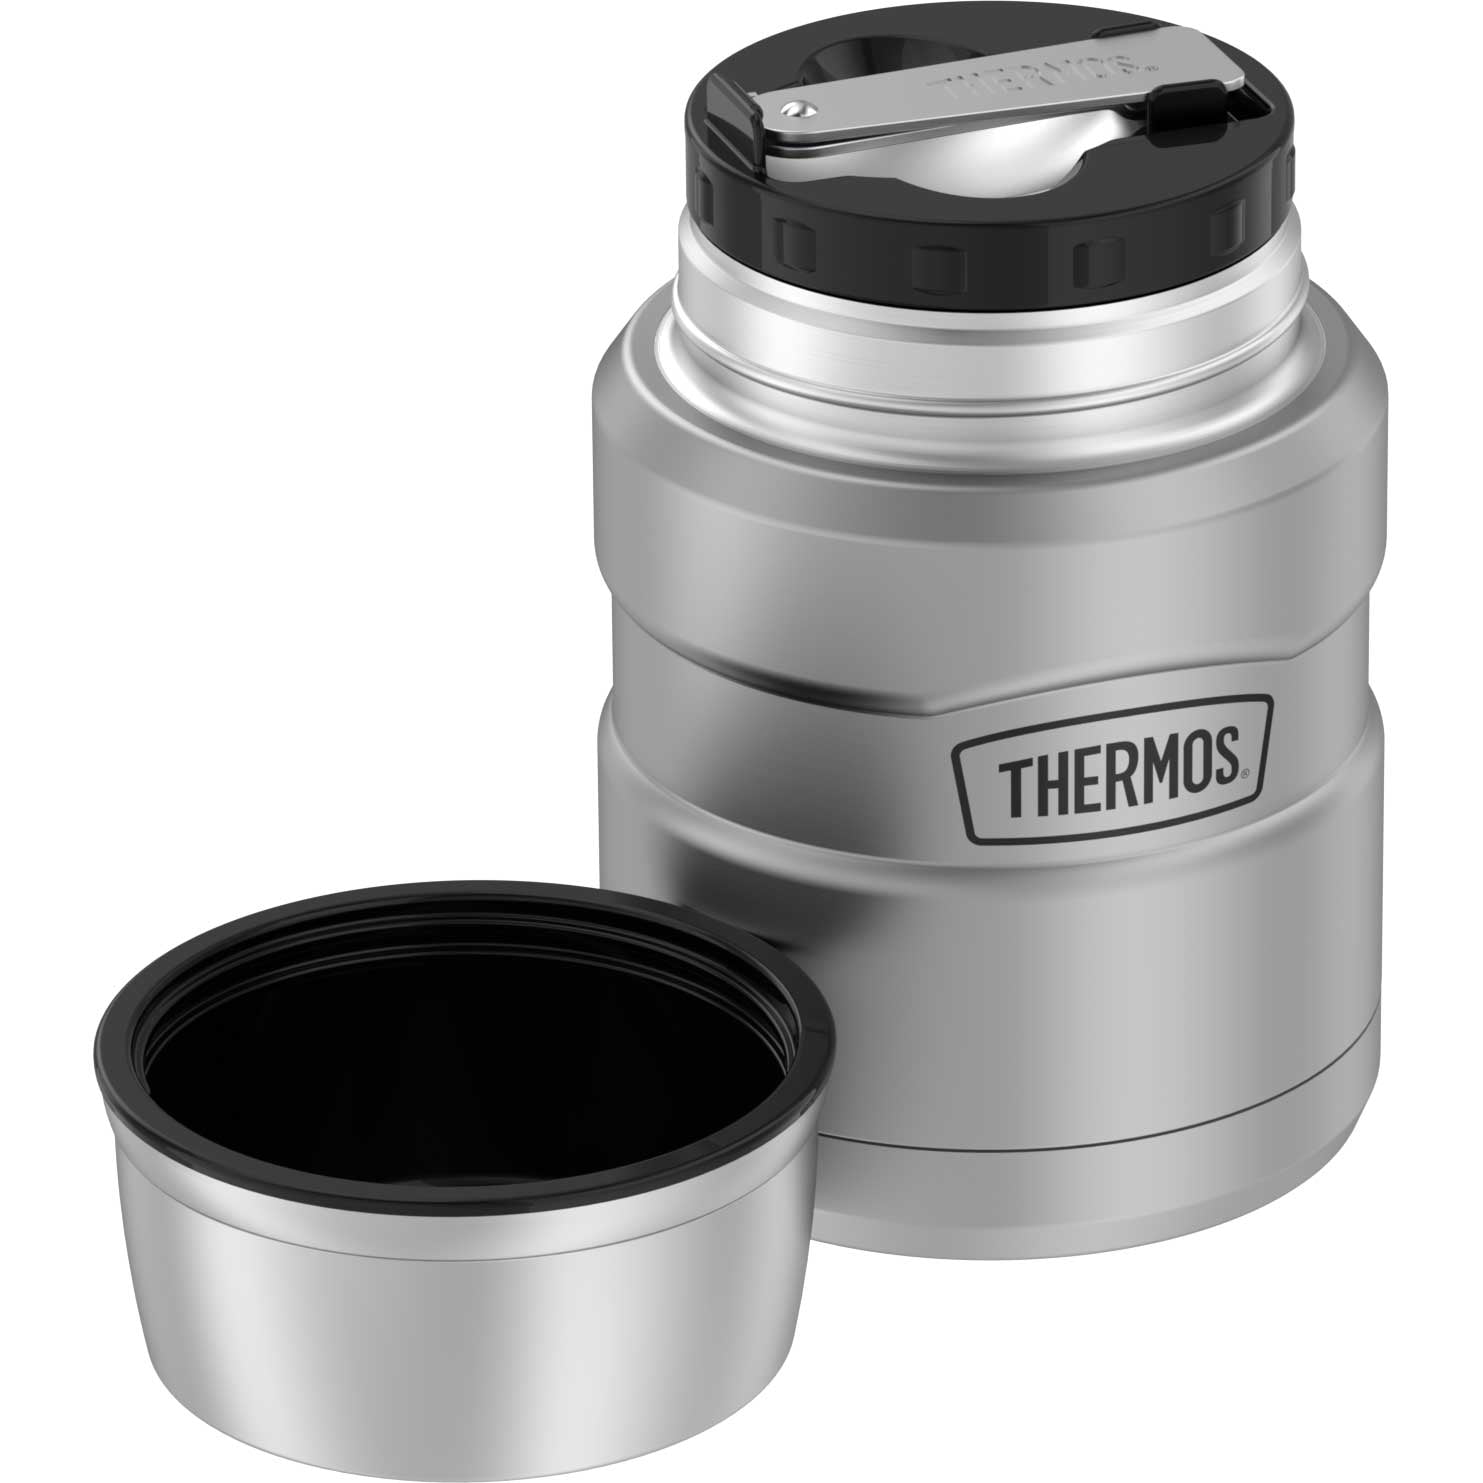  [3 Pack] Impresa Gaskets fits Thermos Stainless King Food Jar  16 and 24 Ounce – Seals/O-Rings With No BPA/Phthalate/Latex - Replacement  for 16 and 24 Ounce Containers : Home & Kitchen